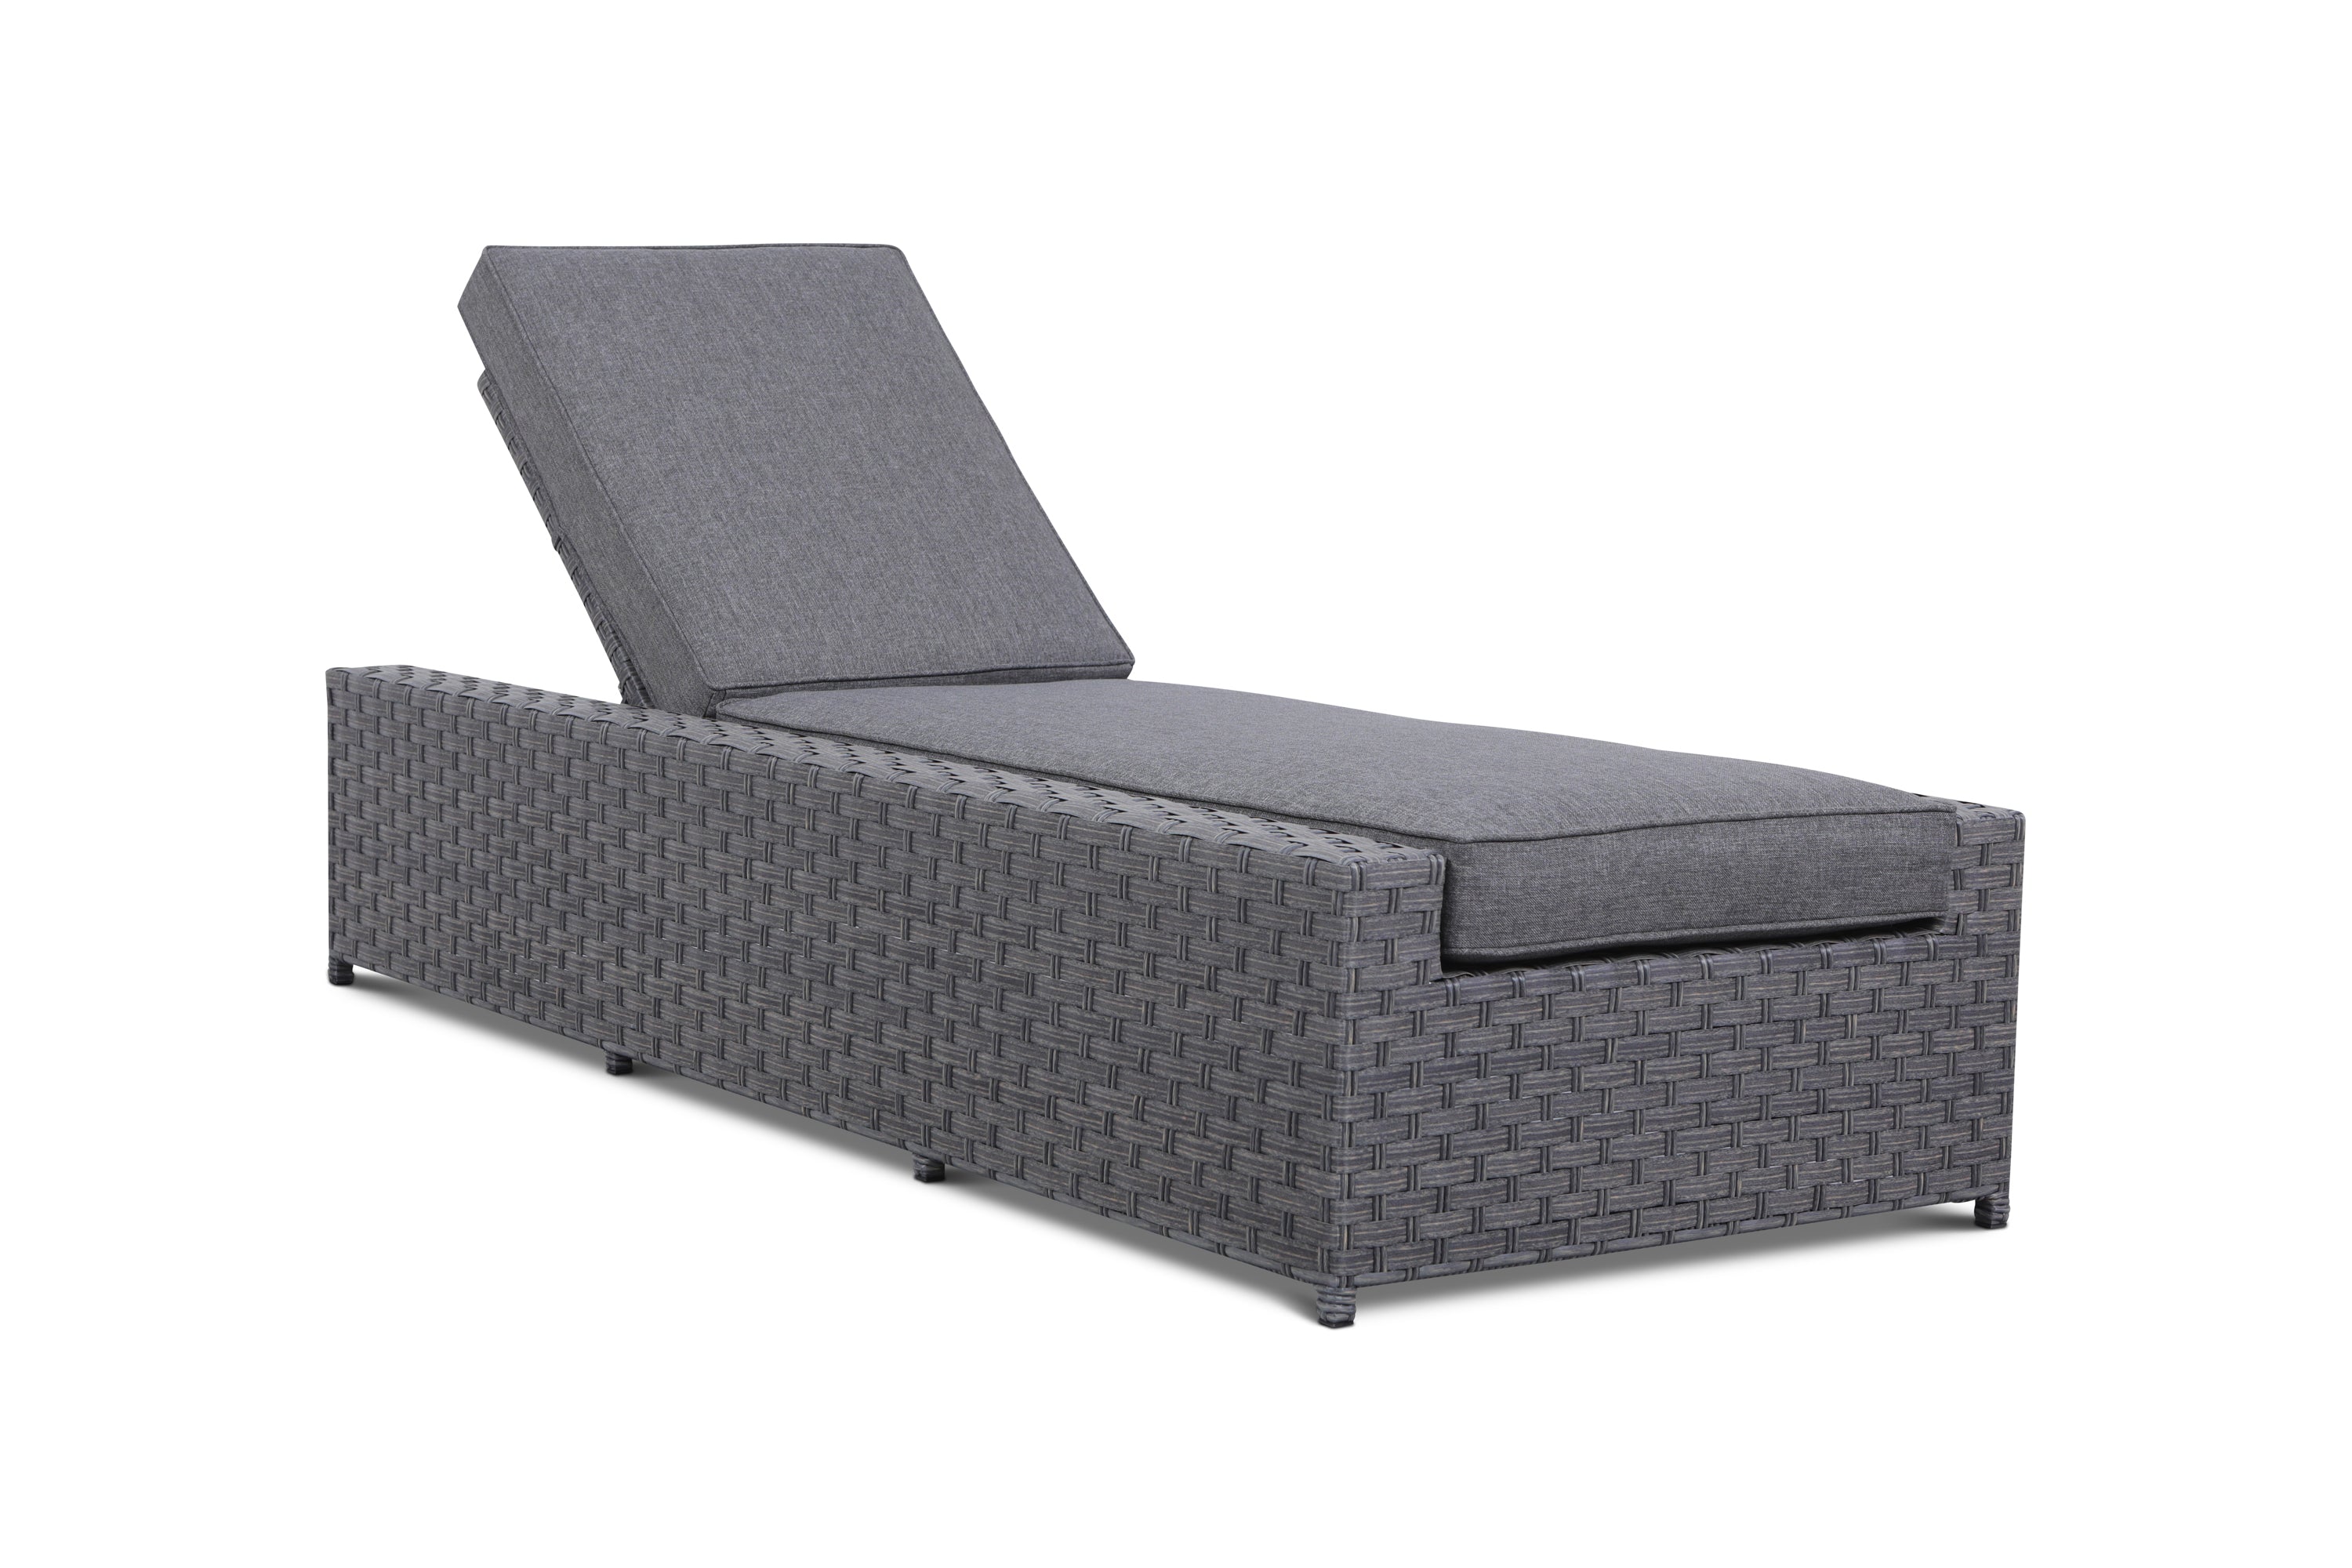 Cromwell 3 Piece Set of Outdoor Wicker Chaise Lounges with End Table